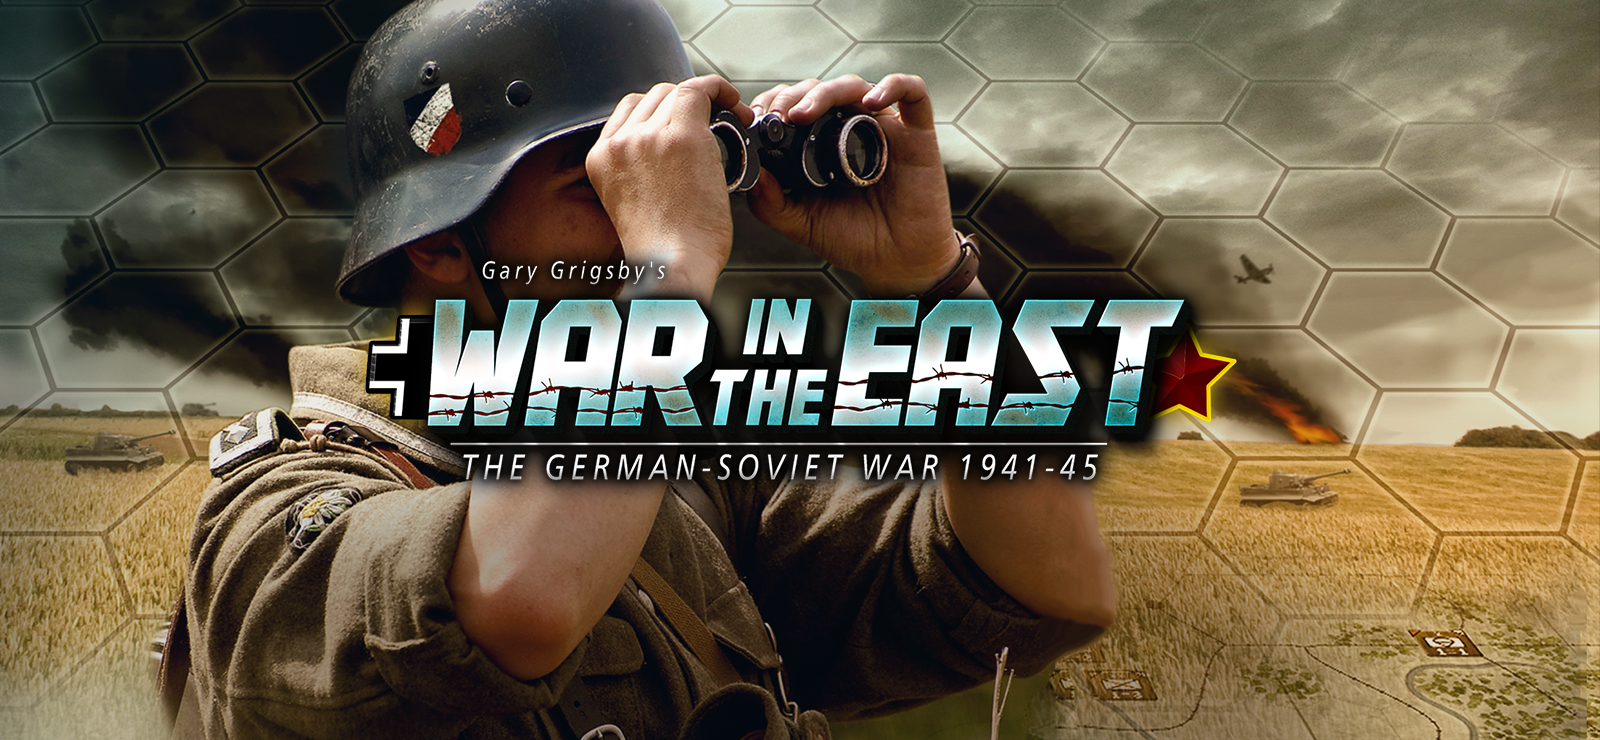 Gary Grigsby's War In The East